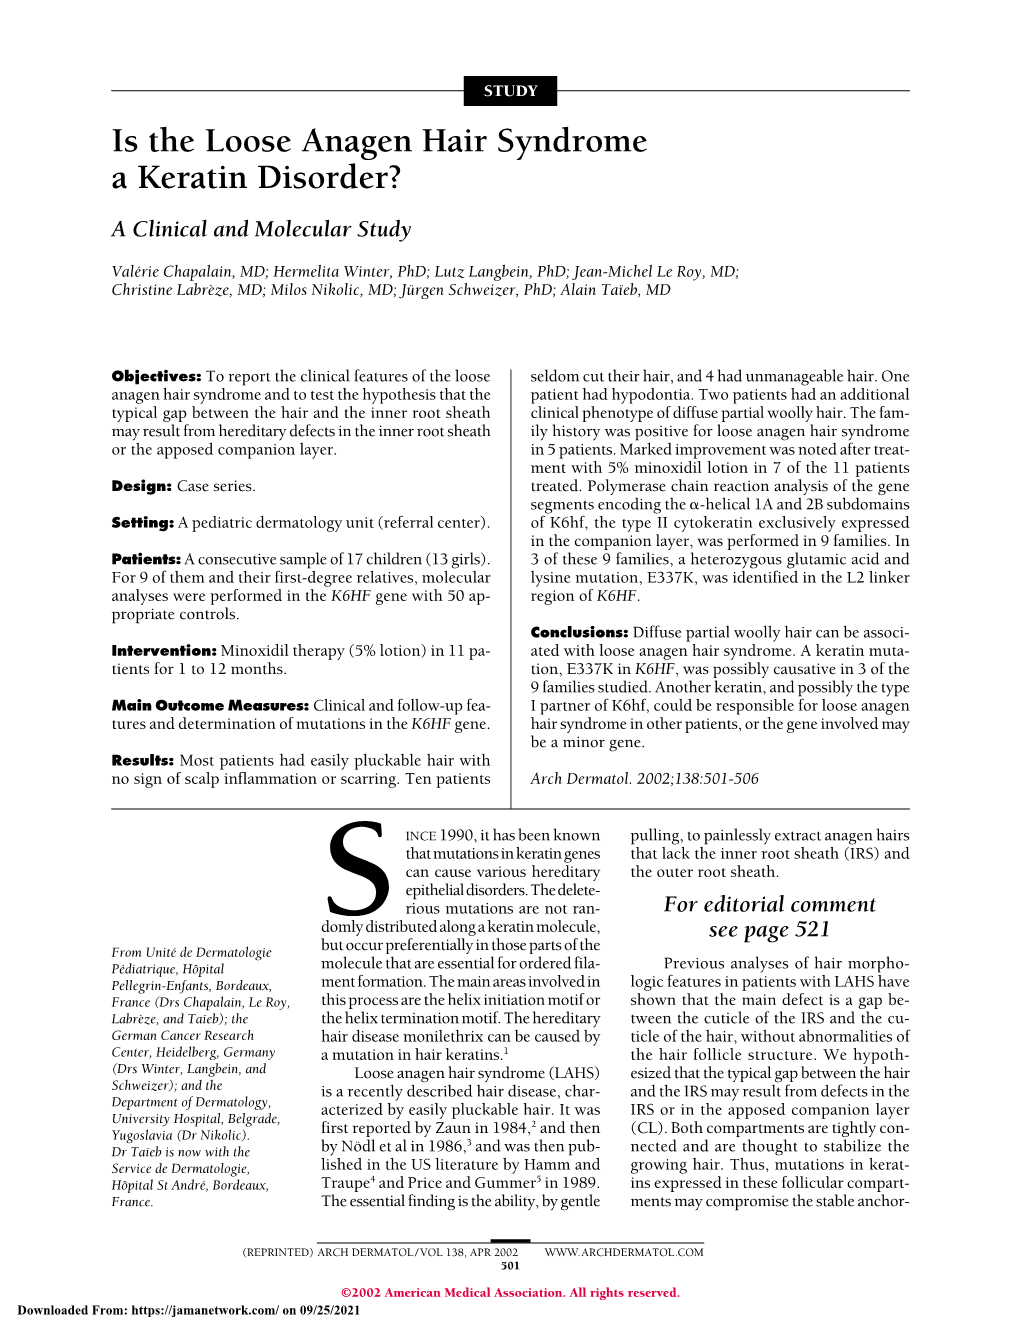 Is the Loose Anagen Hair Syndrome a Keratin Disorder? a Clinical and Molecular Study